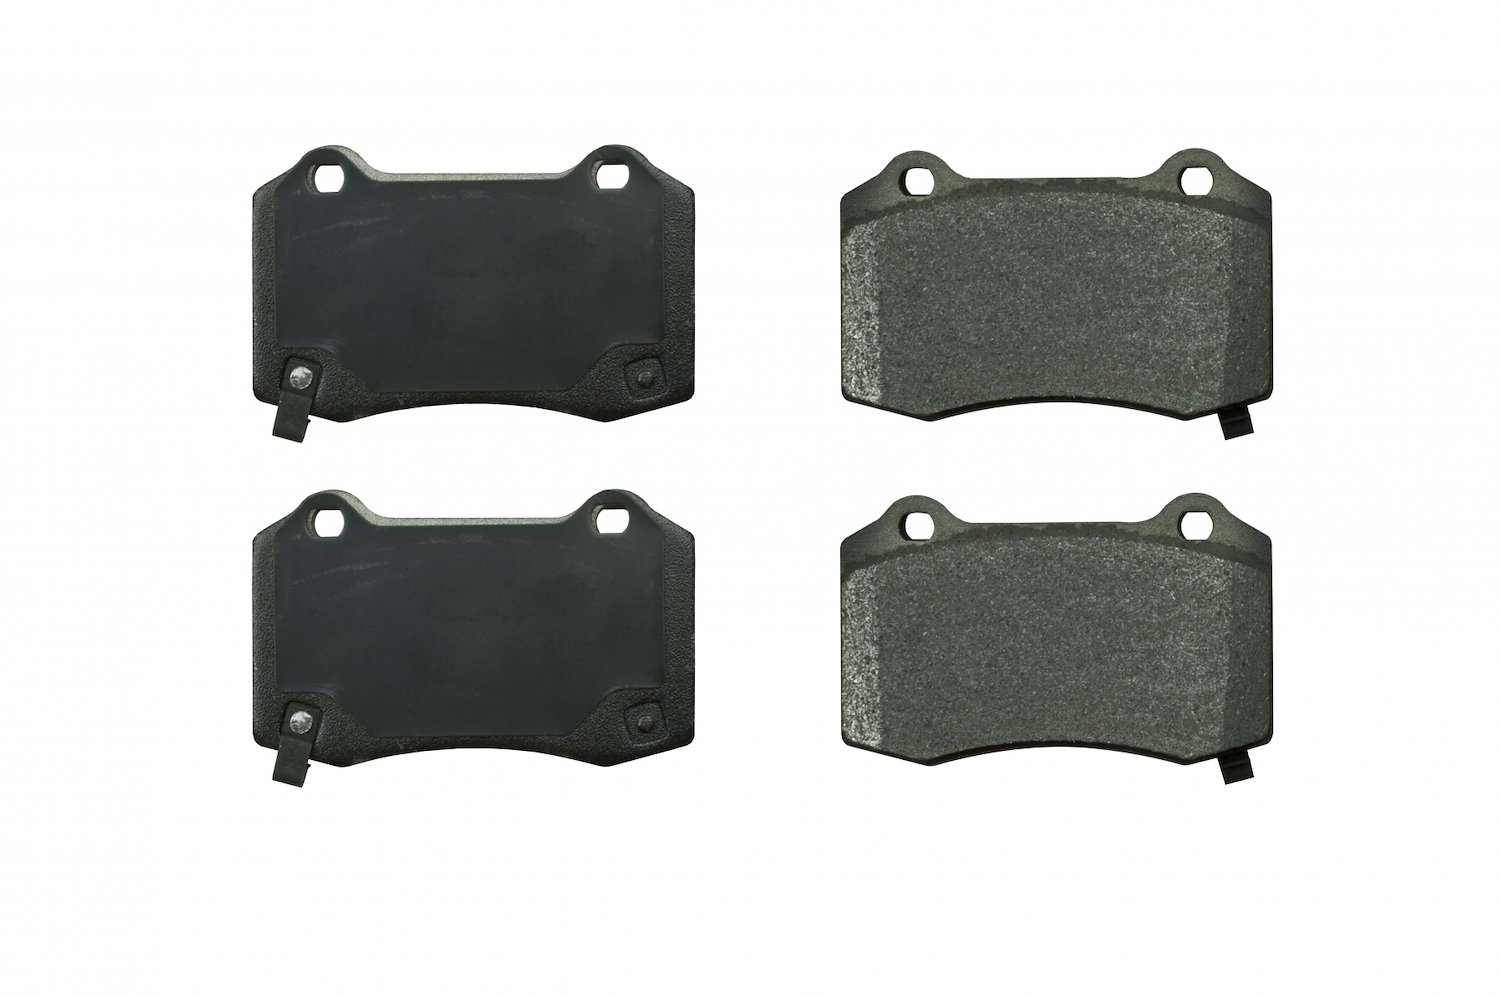 "04 - "11 Cadillac/Chevrolet/Chrysler/Dodge/Jeep - CTS/STS/Camaro/300/CHarger/Magnum/Grand Cherokee, Brake pads